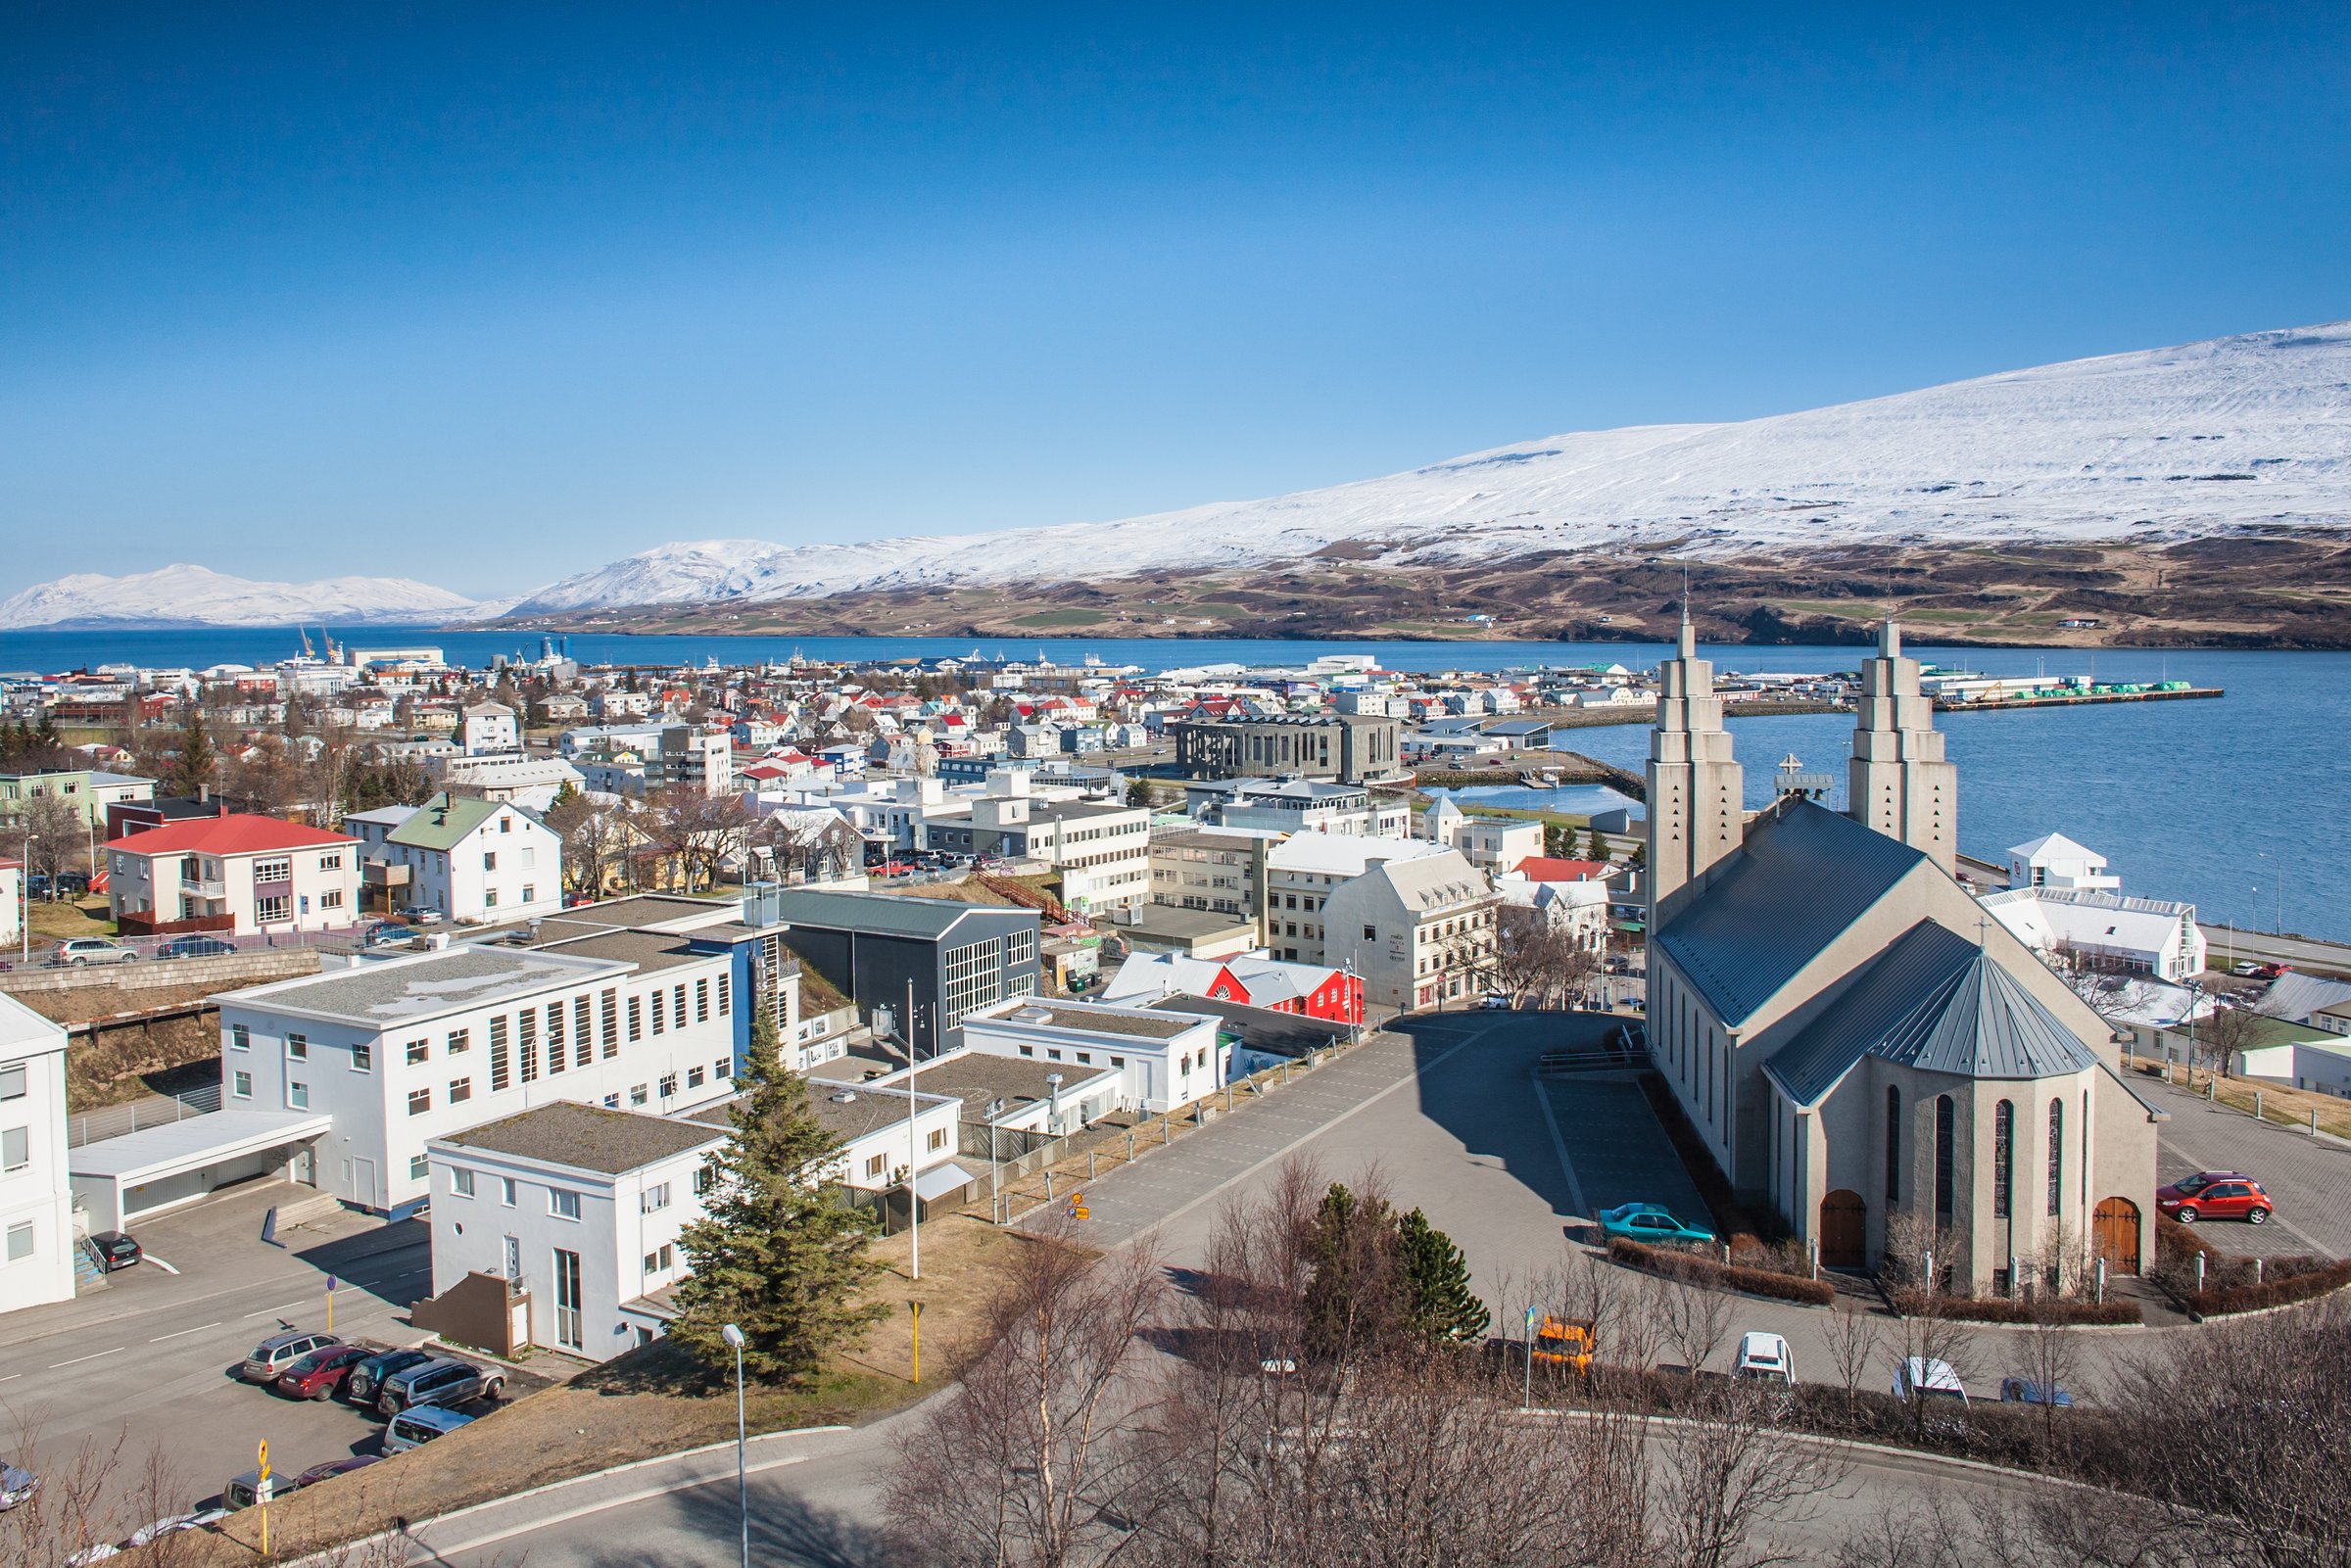 An aerial view of downtown Akureyro with the fjord in the background and the distinctive town church in the foreground